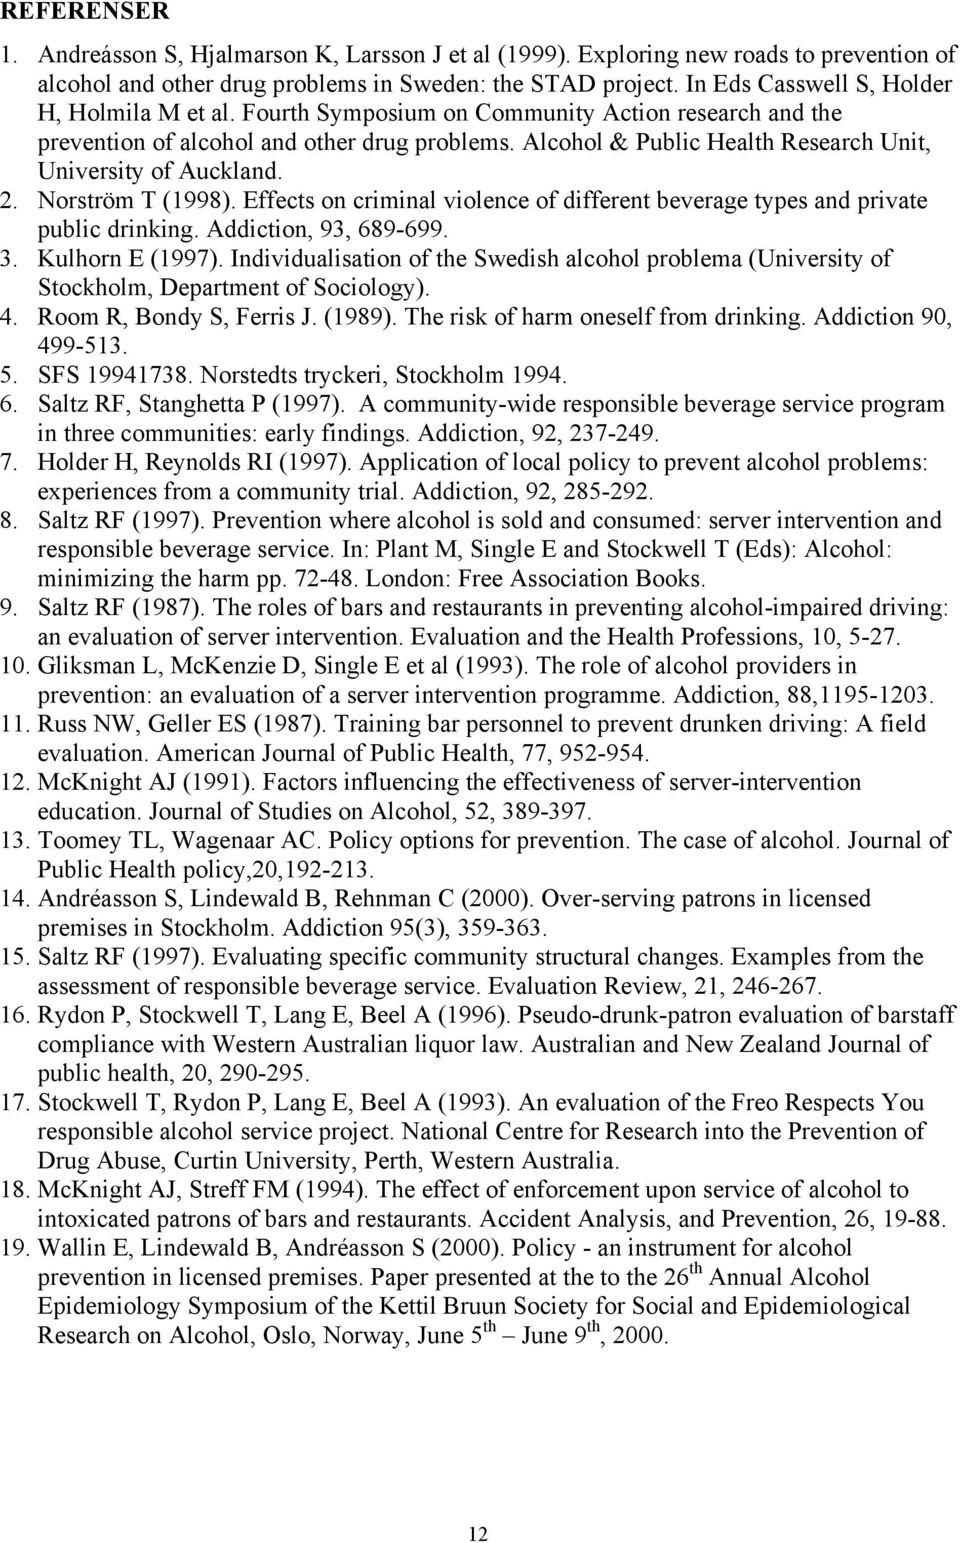 Alcohol & Public Health Research Unit, University of Auckland. 2. Norström T (1998). Effects on criminal violence of different beverage types and private public drinking. Addiction, 93, 689-699. 3.